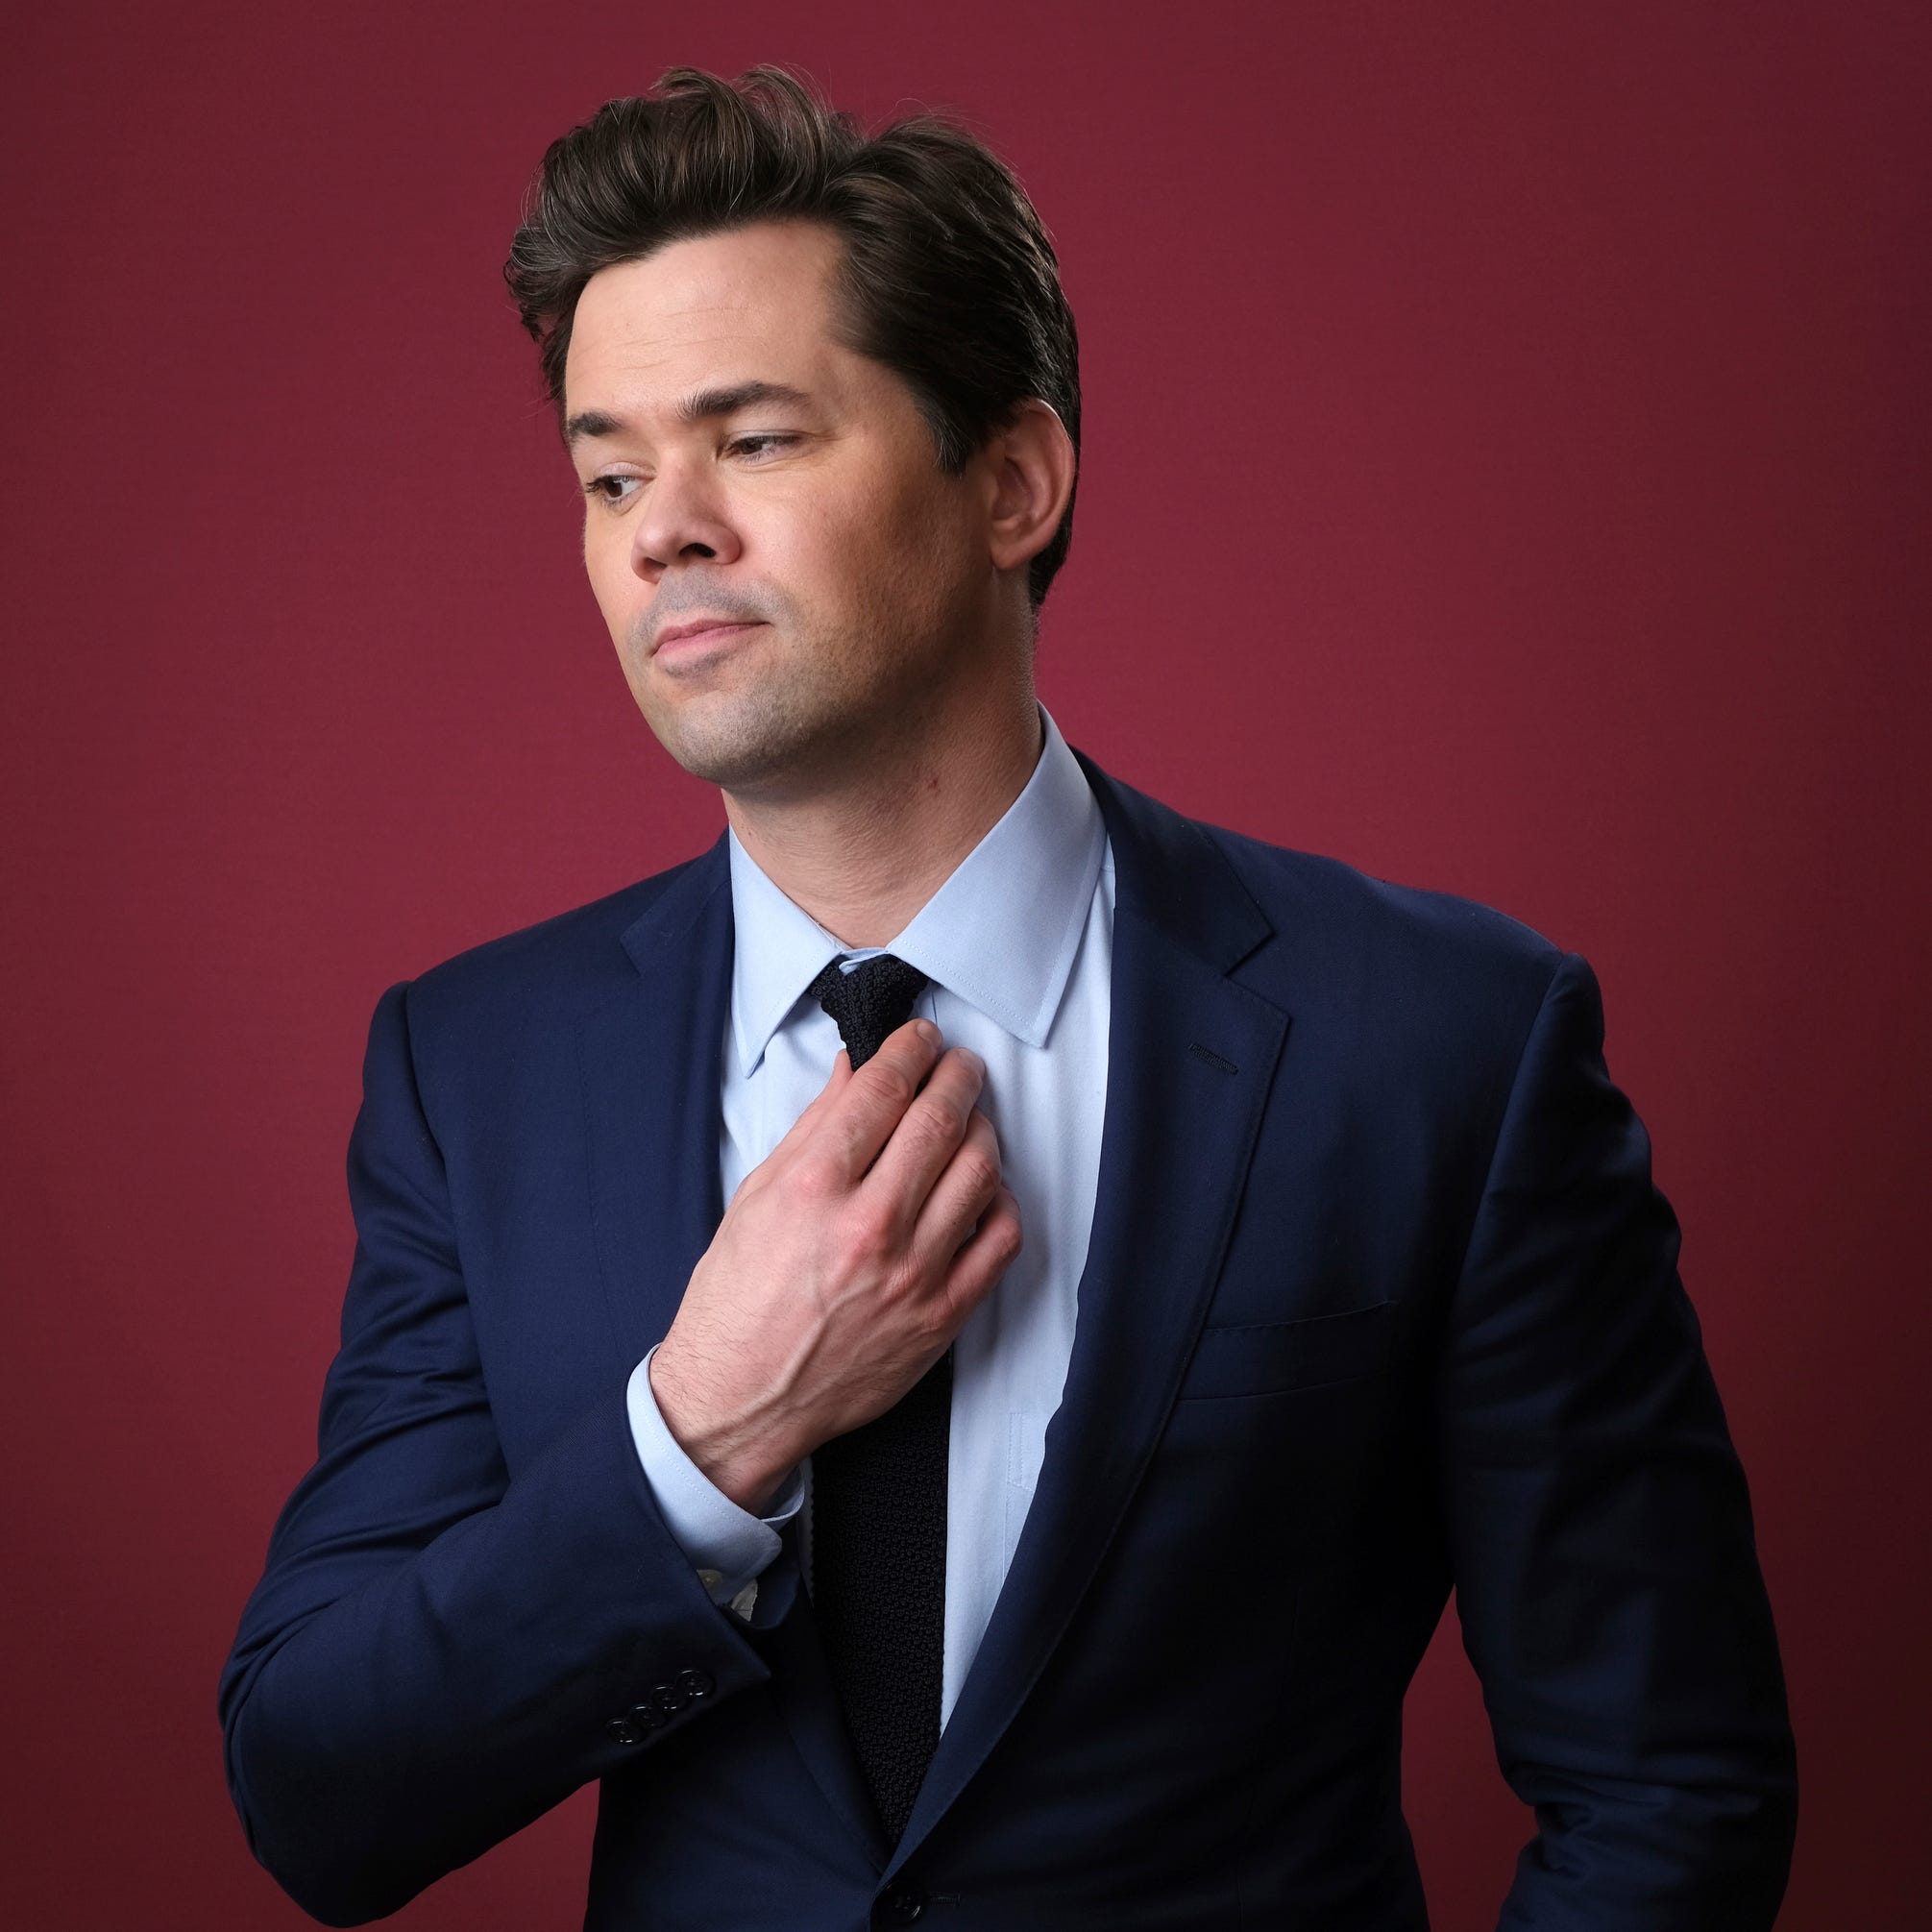 Andrew Rannells, a cast member in the Showtime series "Black Monday," poses during the 2019 Winter Television Critics Association Press Tour, Thursday, in Pasadena, Calif.